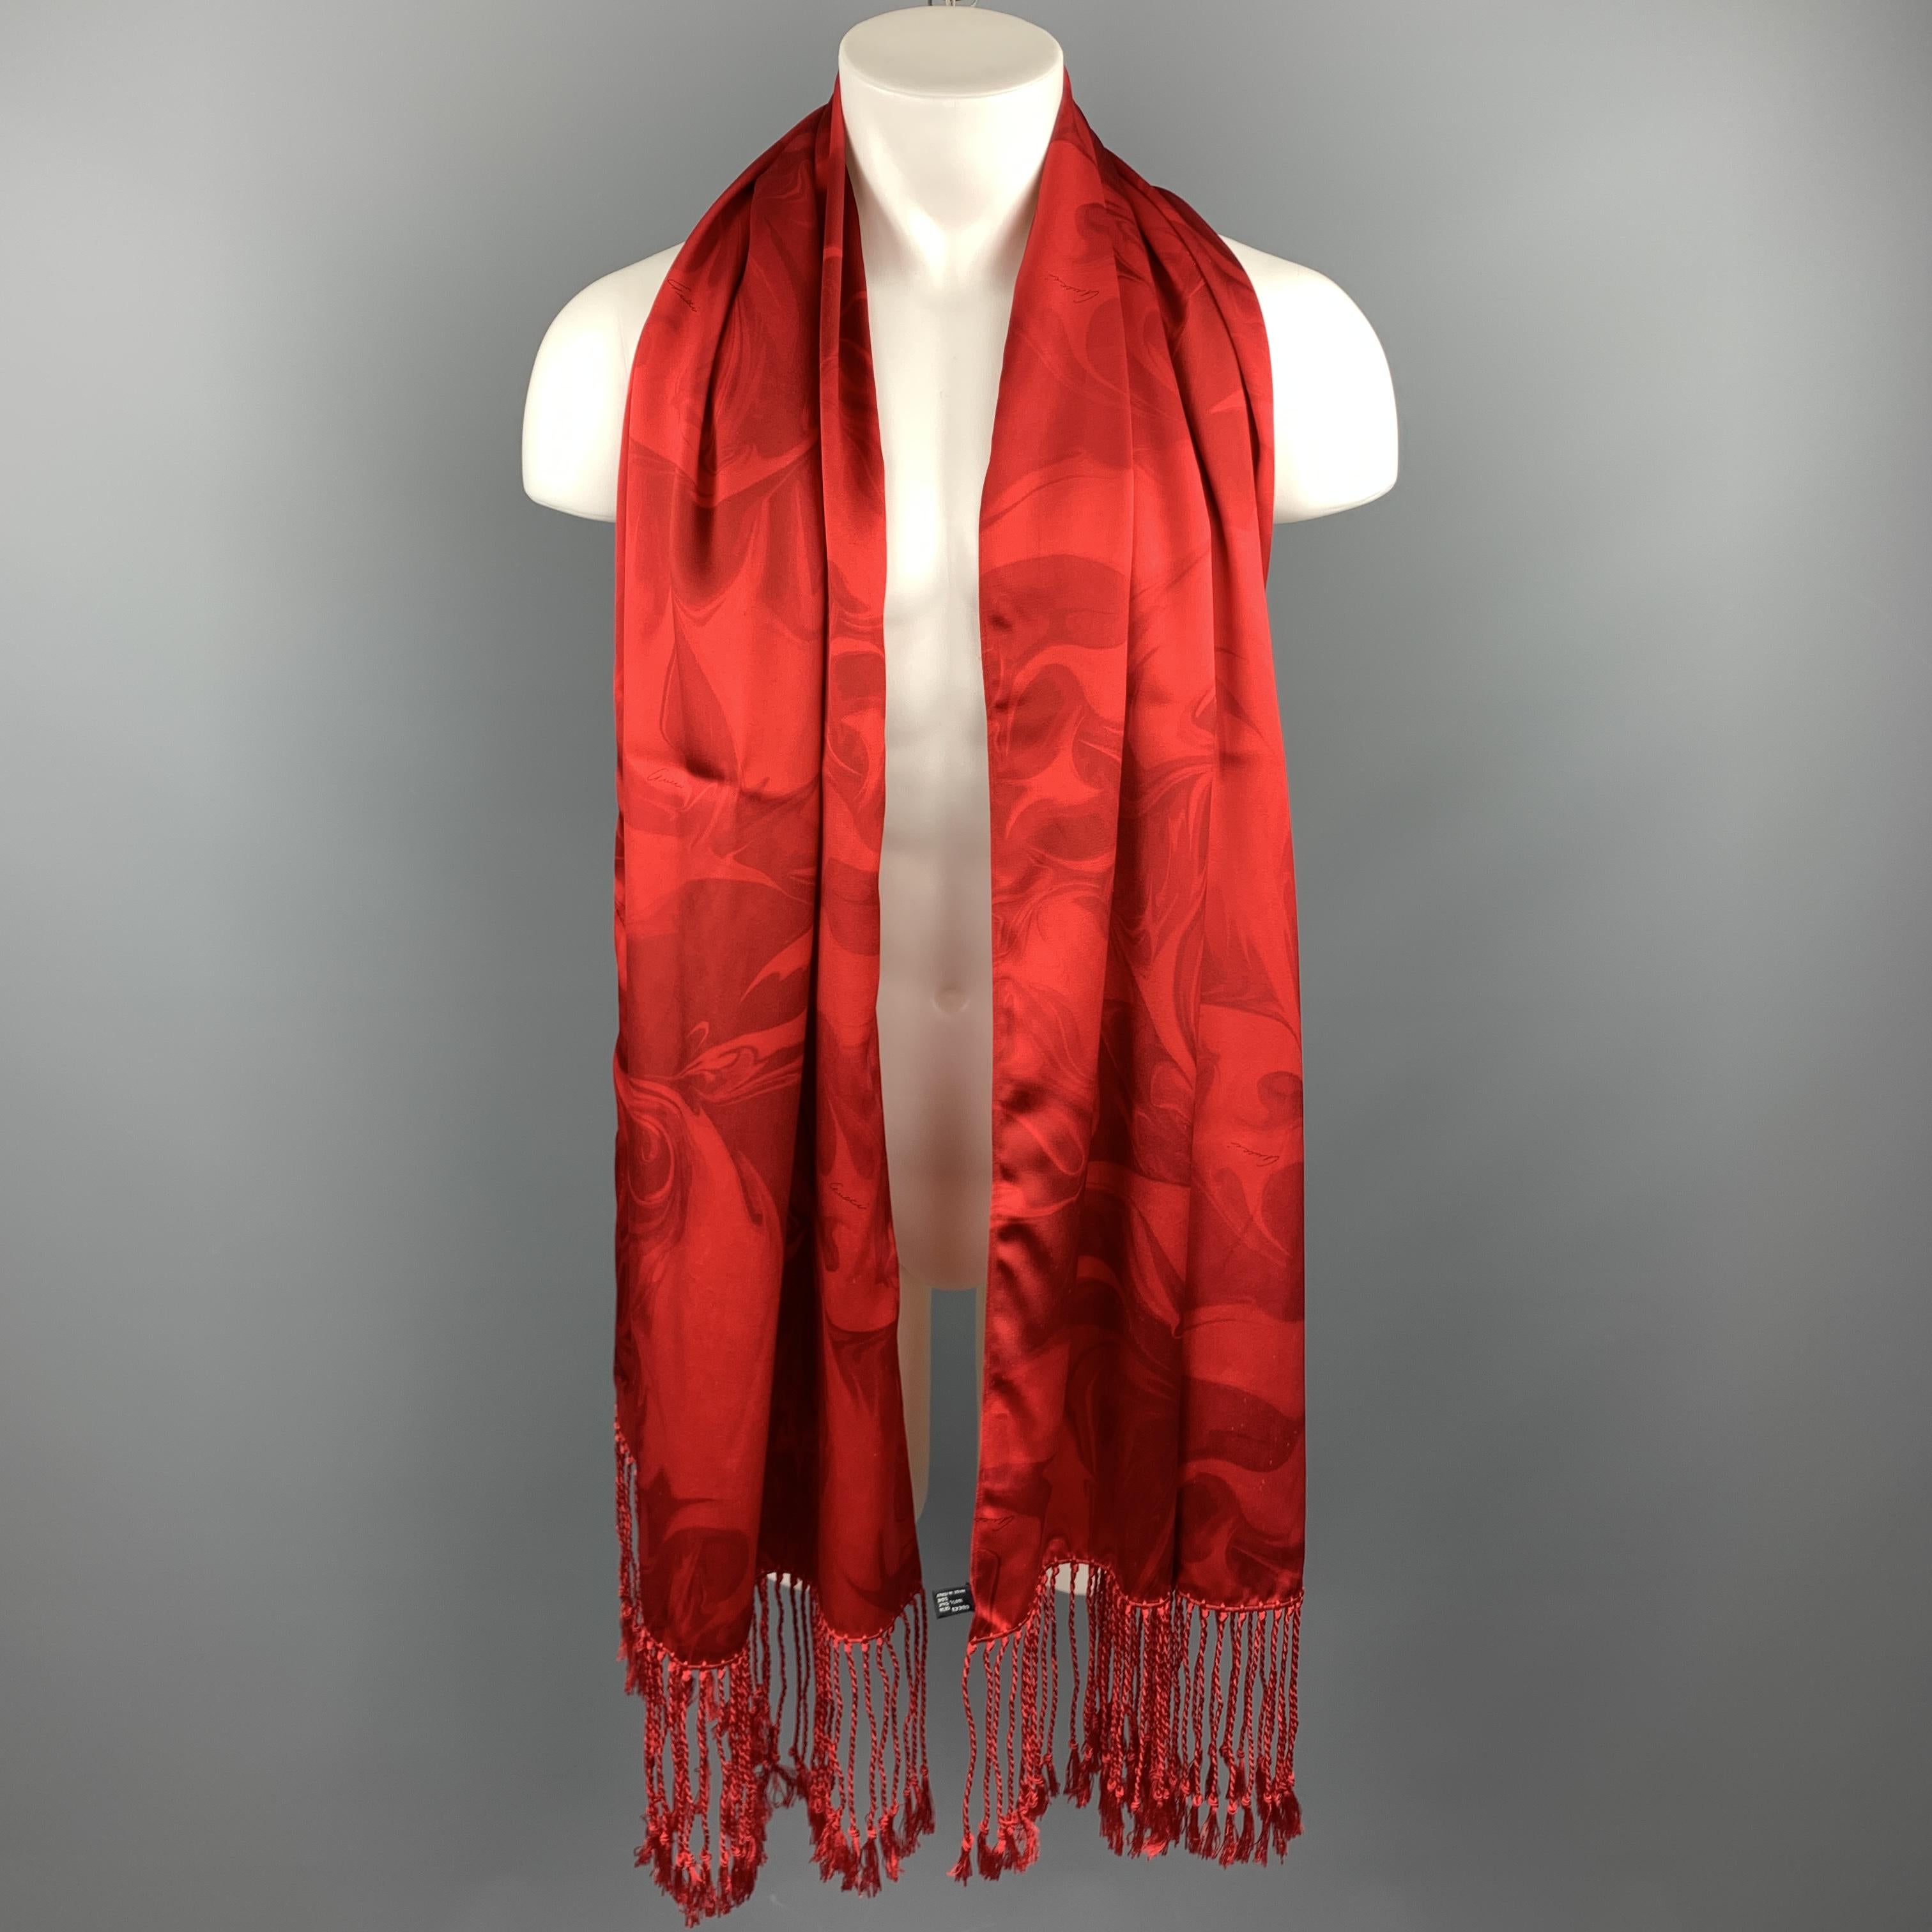 Archive GUCCI by TOM FORD scarf comes in a red smoked marbled print with a seven inch tassel fringe trim. Minor fabric peel throughout. Made in Italy.

Very Good Pre-Owned Condition.

Measurements:

25.5 in. x 76 in.